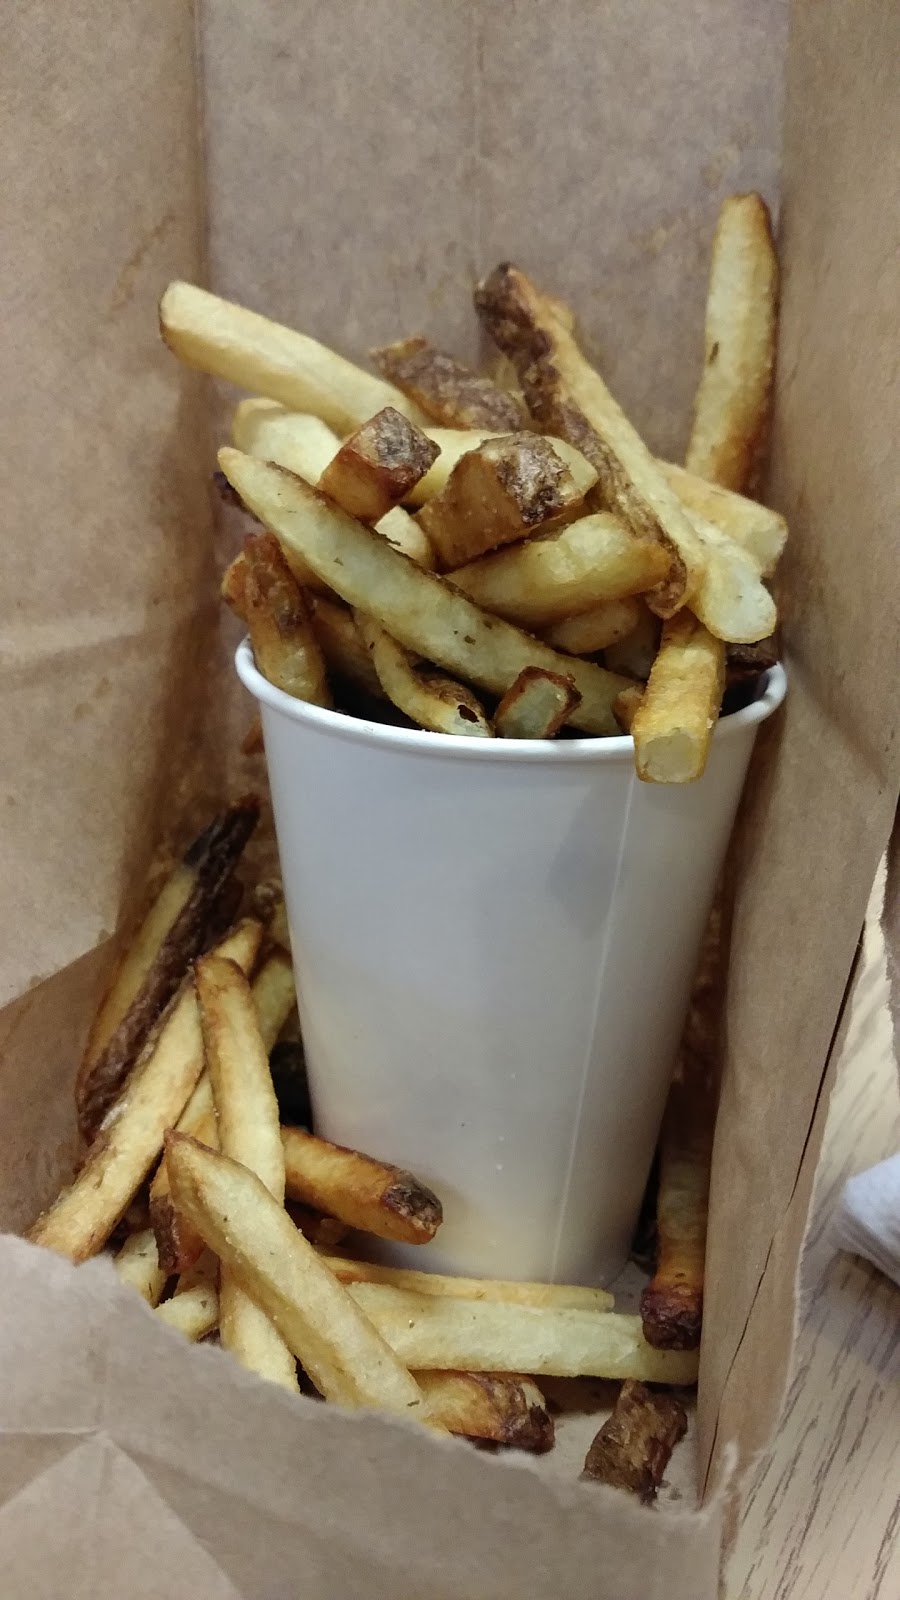 Five Guys | 1301 W Bakerview Rd, Bellingham, WA 98226, USA | Phone: (360) 734-8300